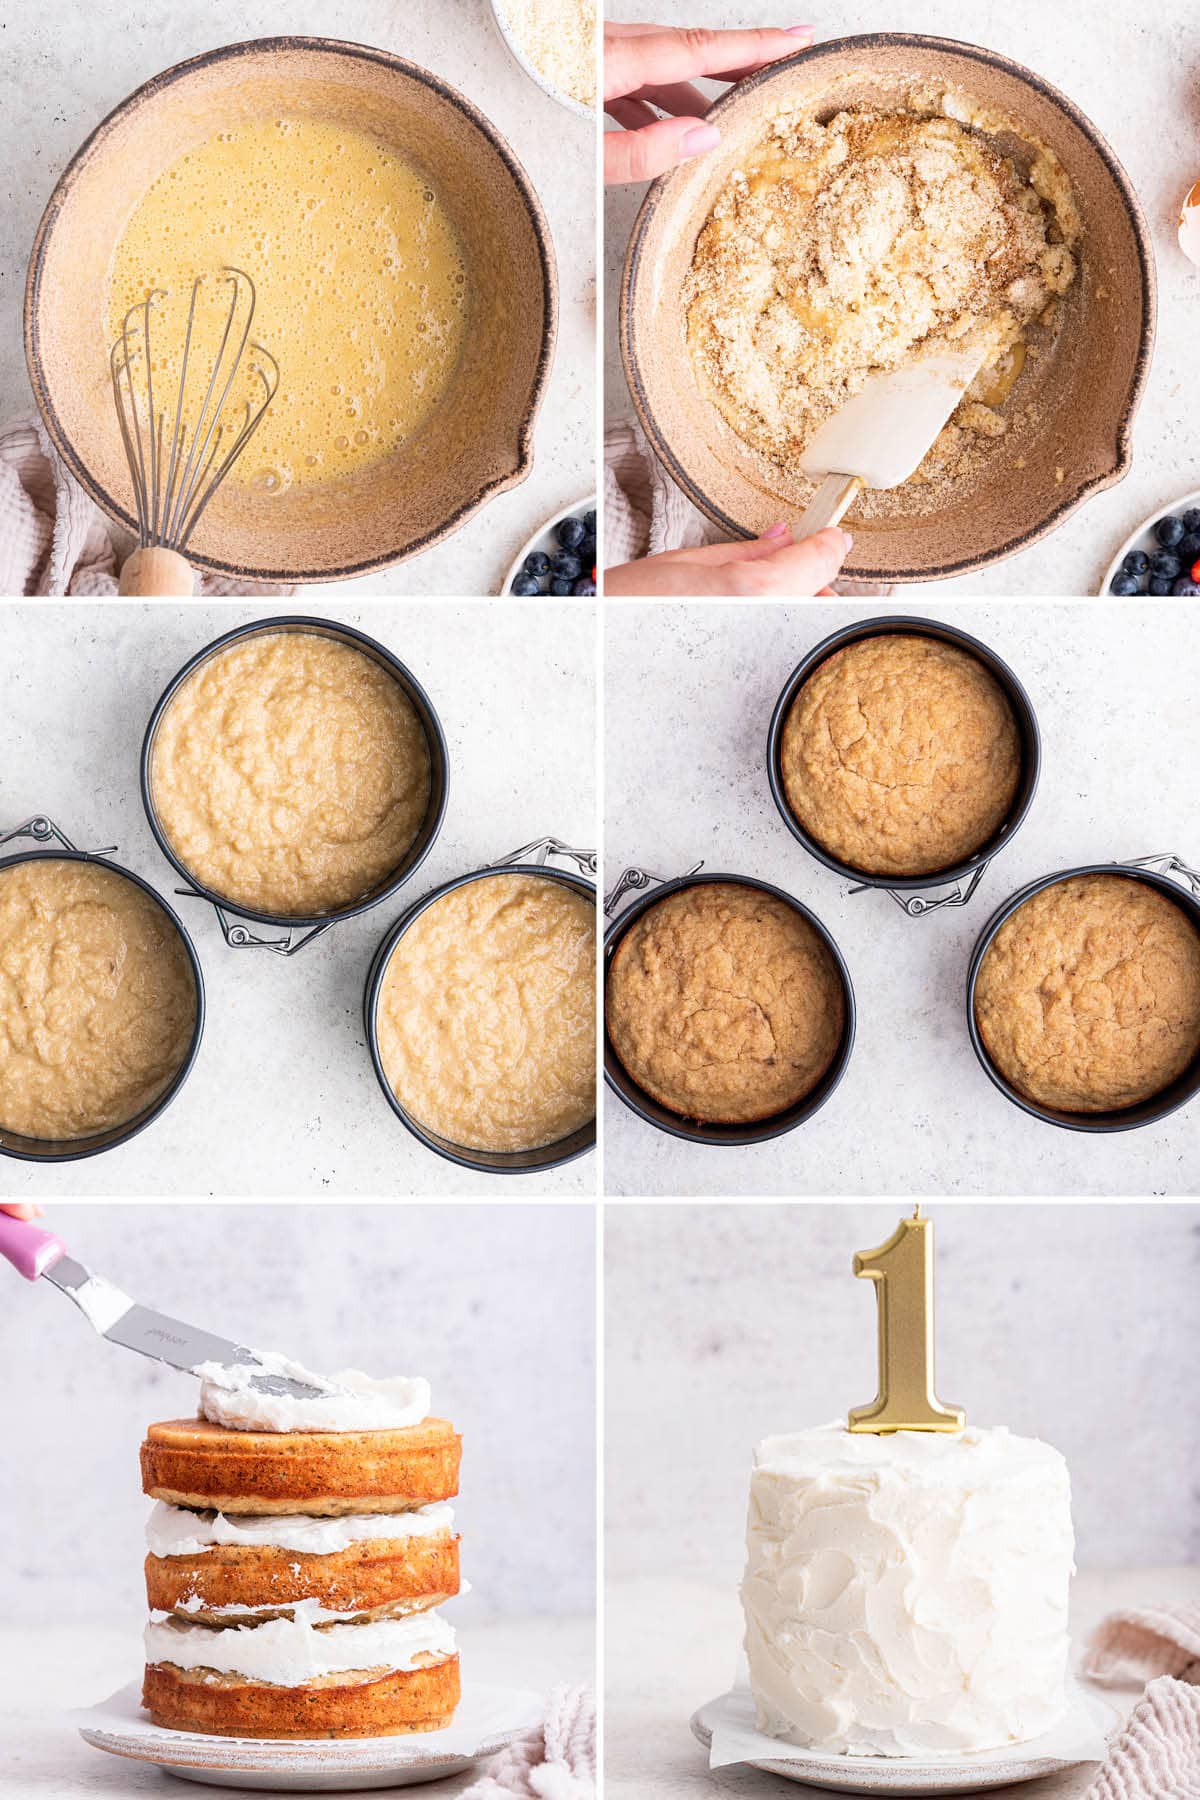 Collage of six photos showing how to make a Healthy Smash Cake: mixing the batter, baking three mini cake layers, and then frosting the cake.